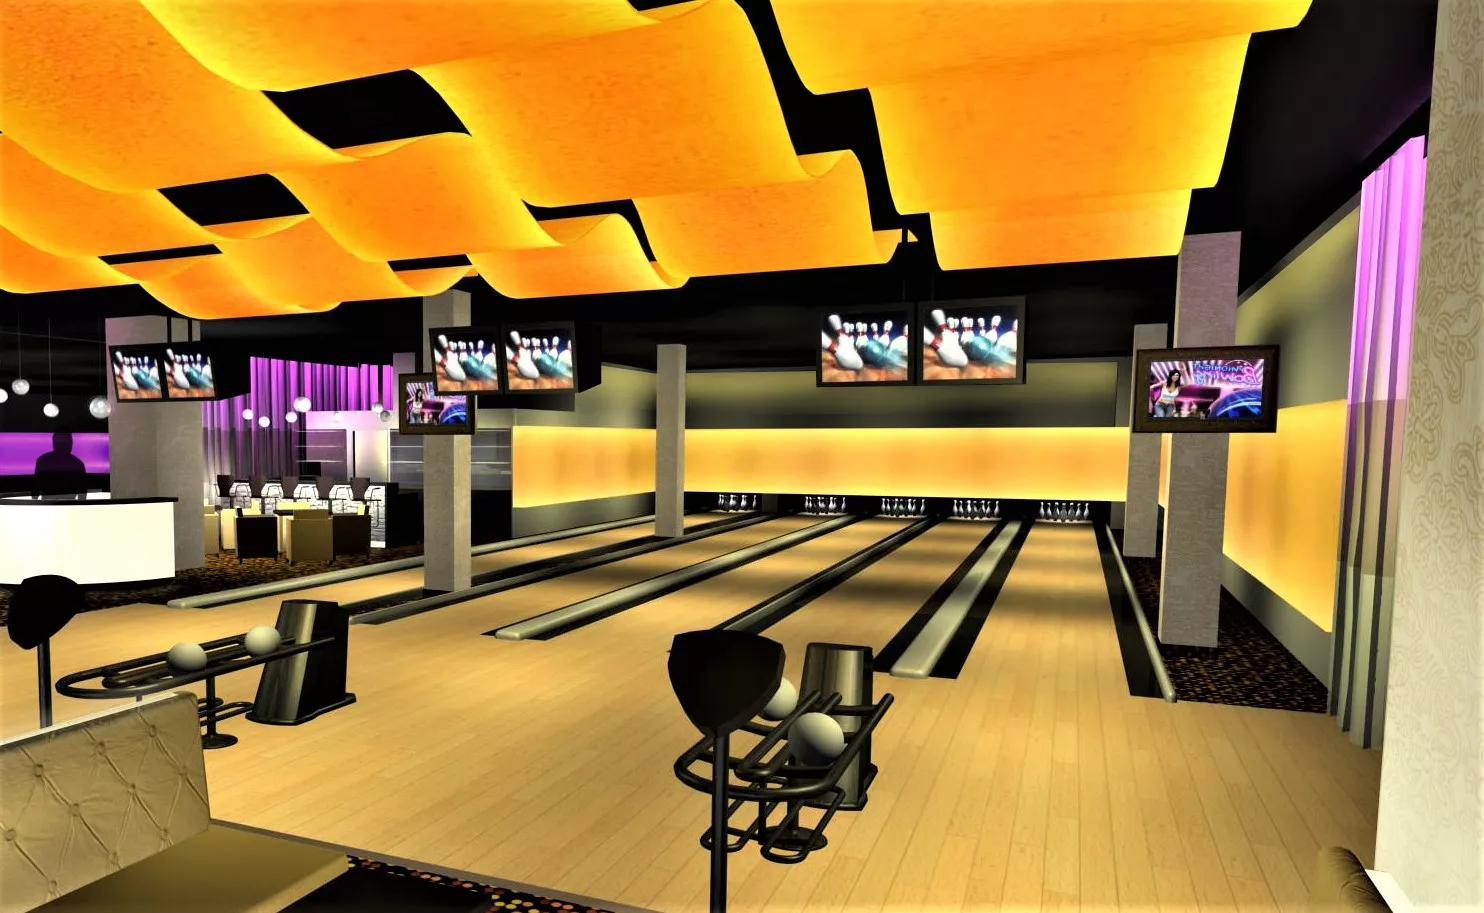 Ocean park PlusCity in Austria, Europe | Bowling - Rated 4.4